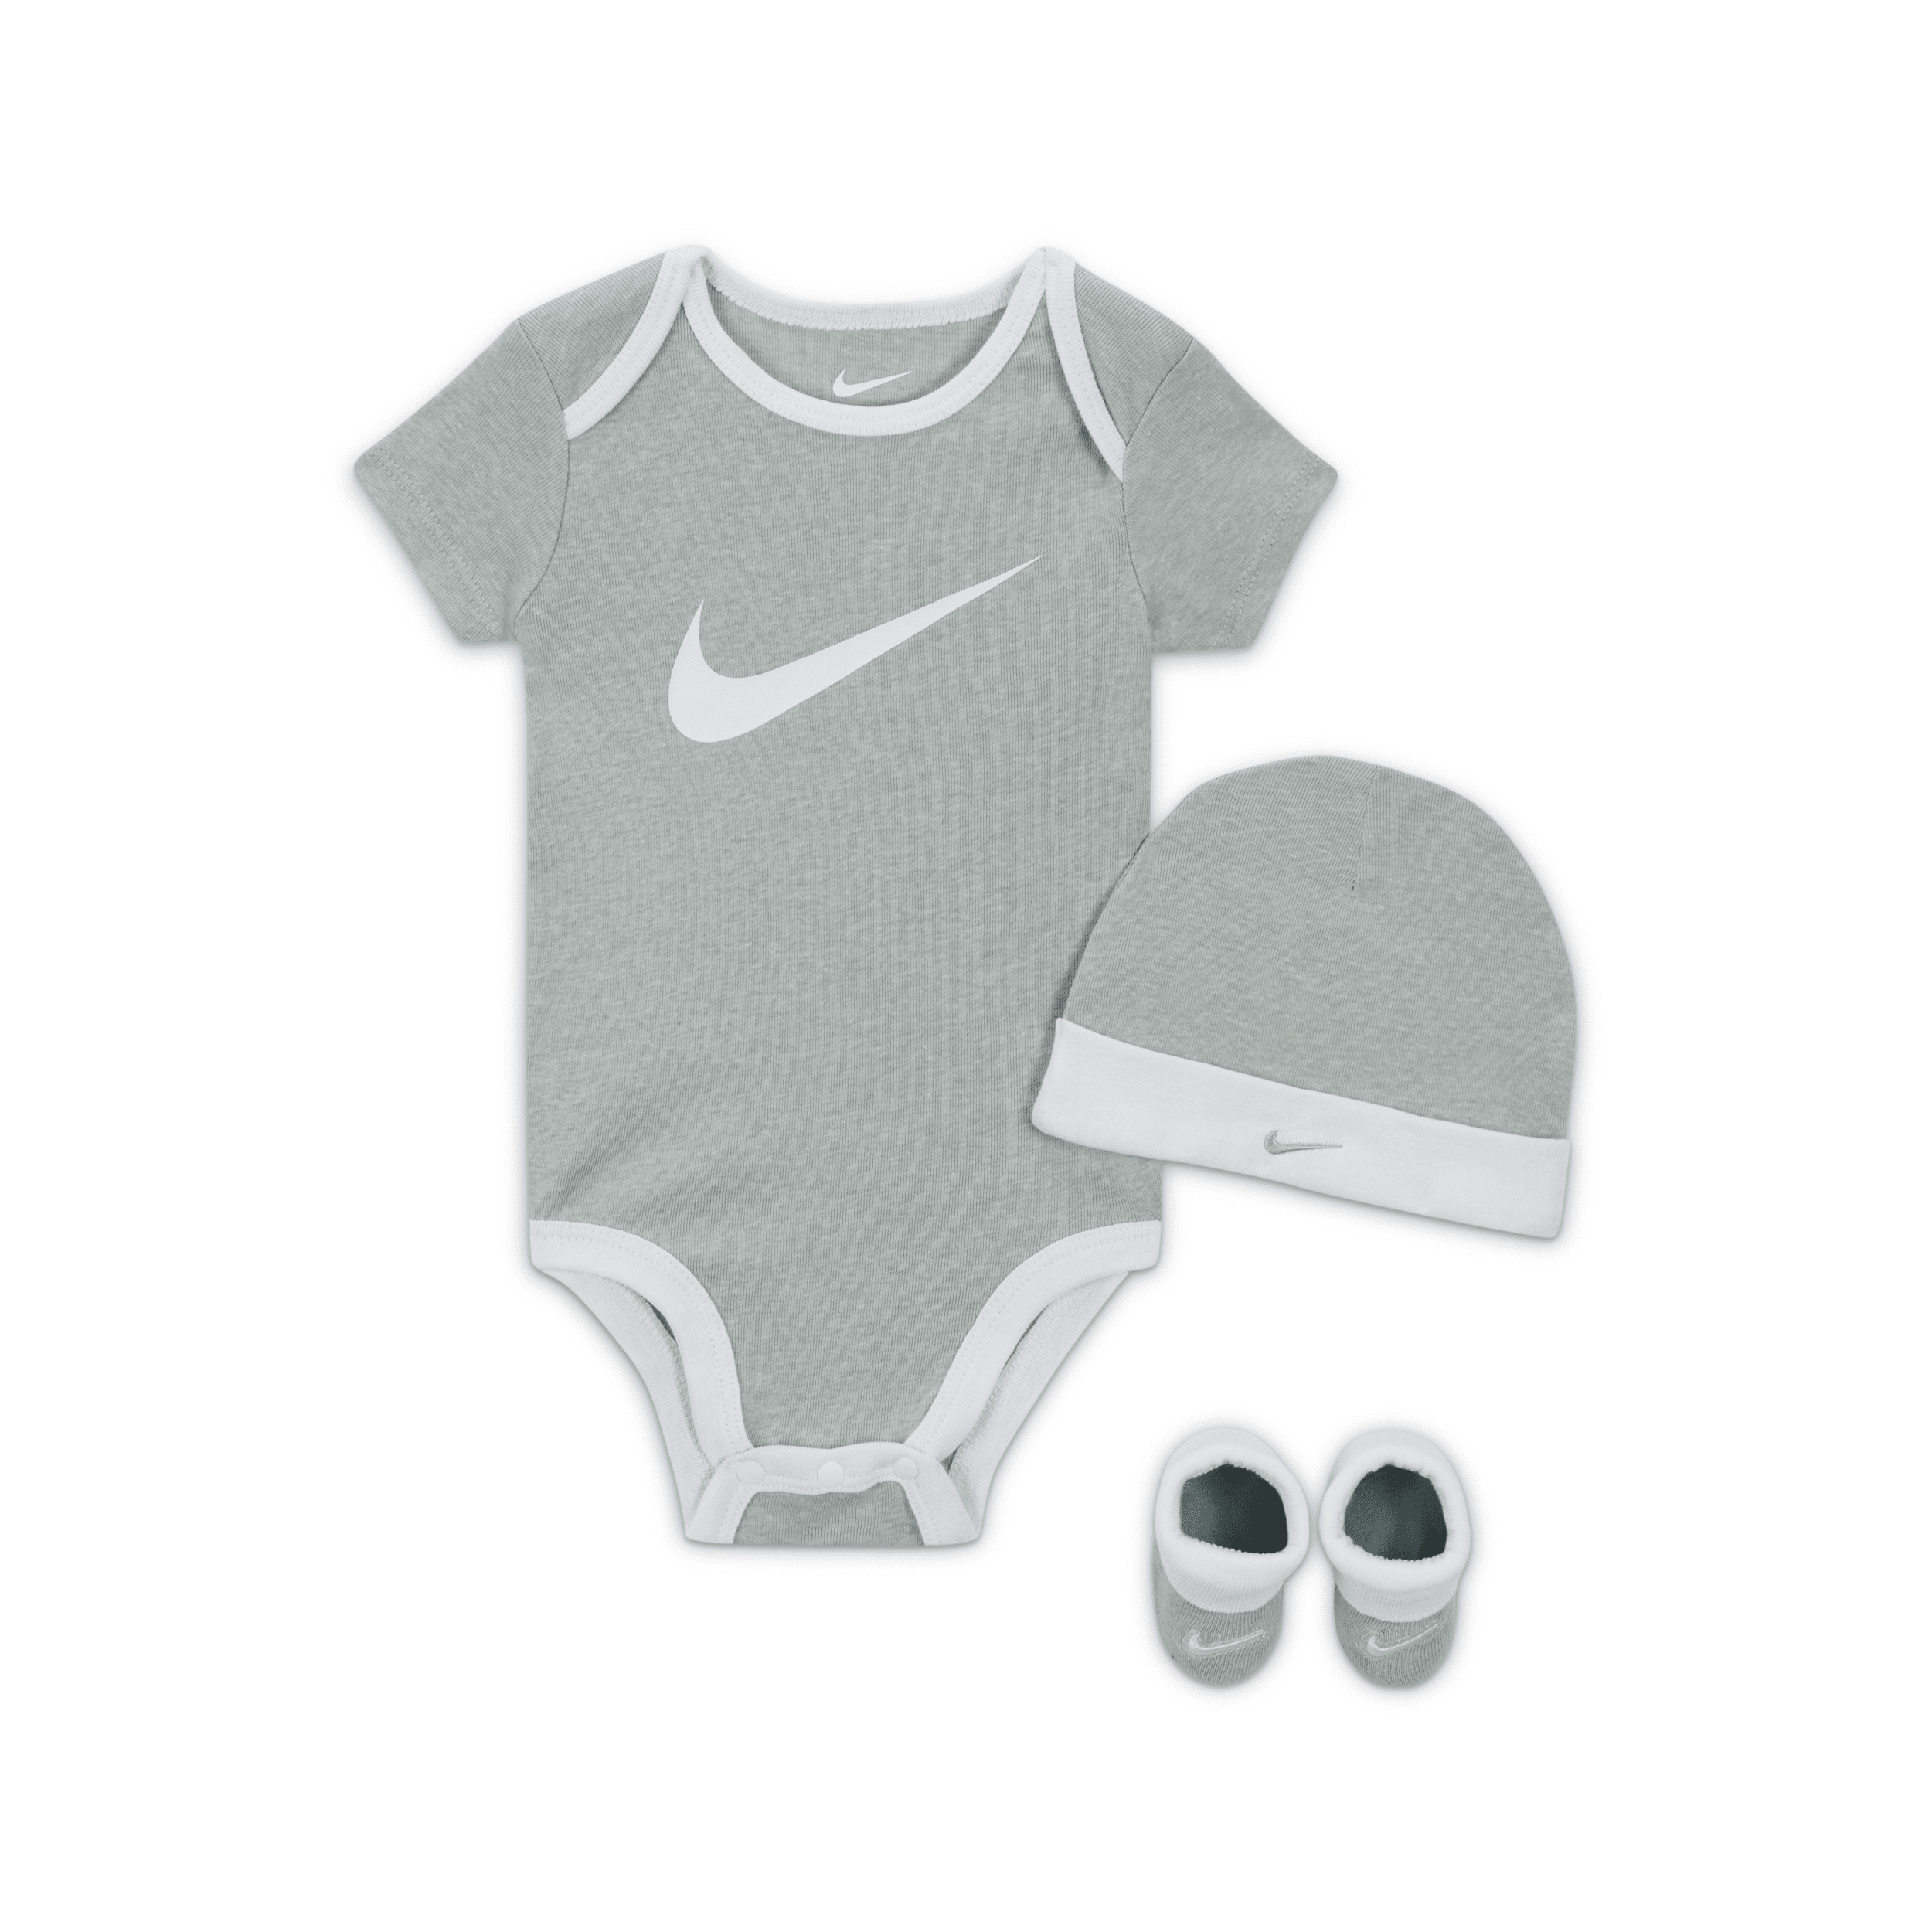 Nike Baby (6-12m) Bodysuit, Hat And Booties Box Set In Grey